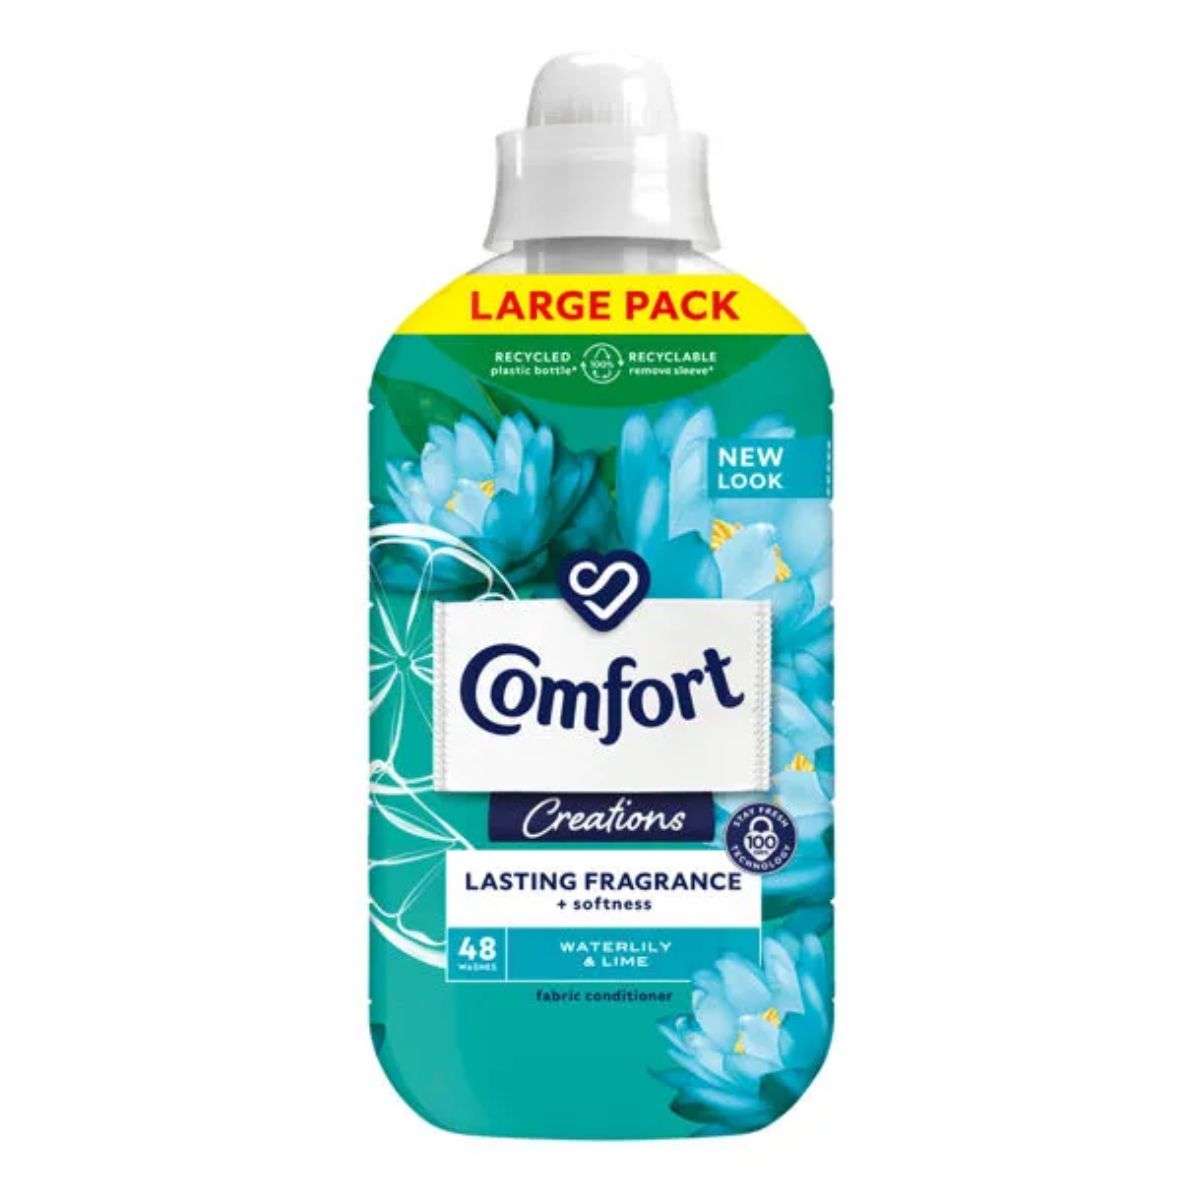 Comfort - Fabric Conditioner Waterlily - 48 Washes - large pack.